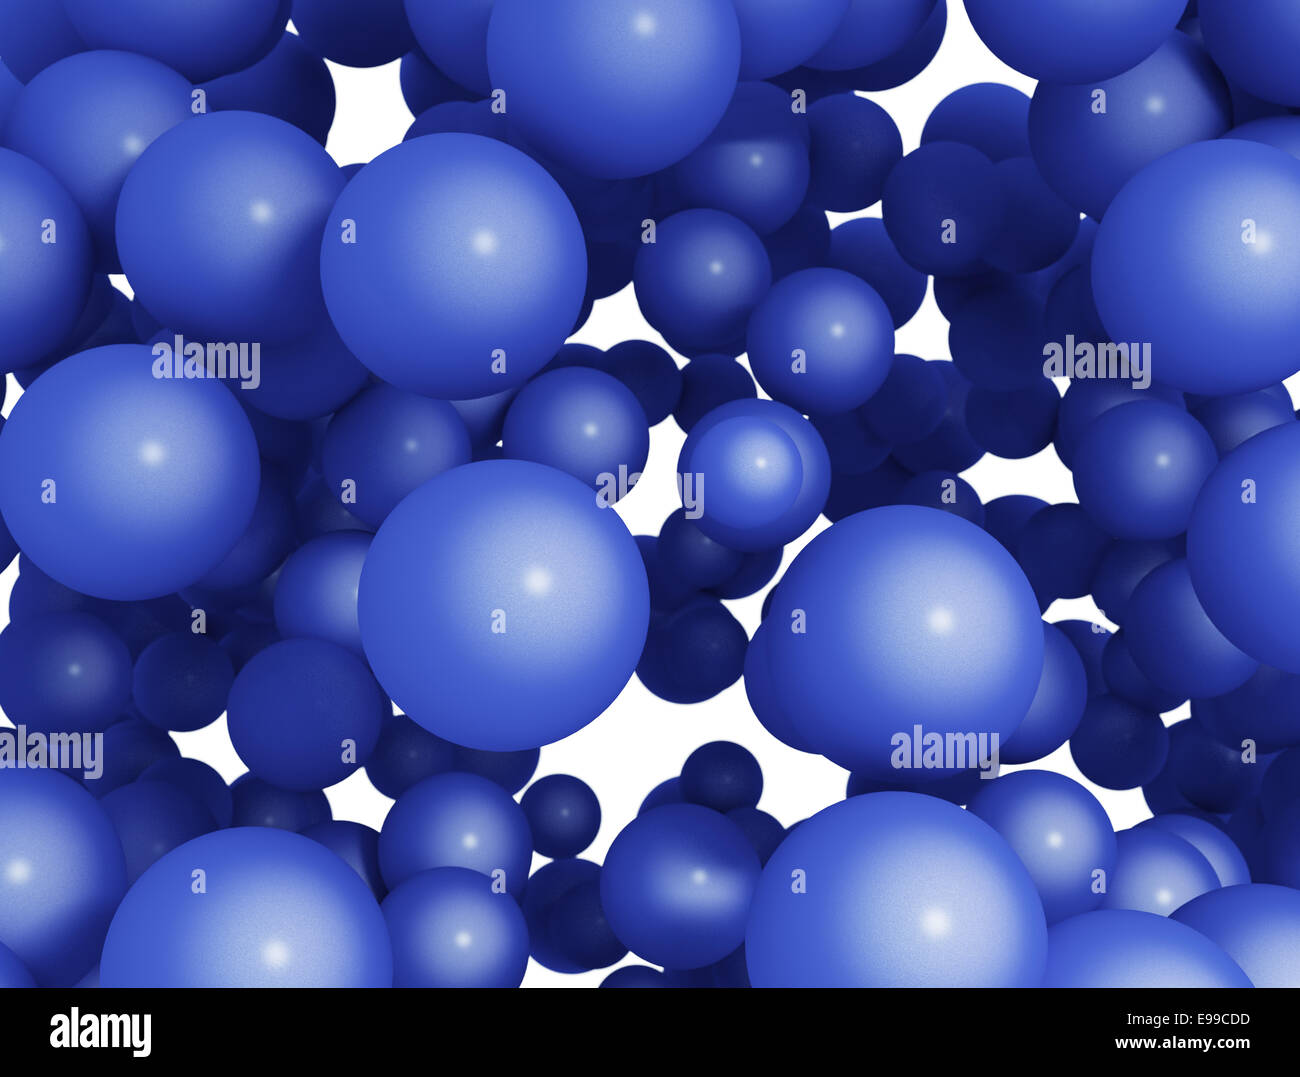 Group of blue glossy spheres Stock Photo